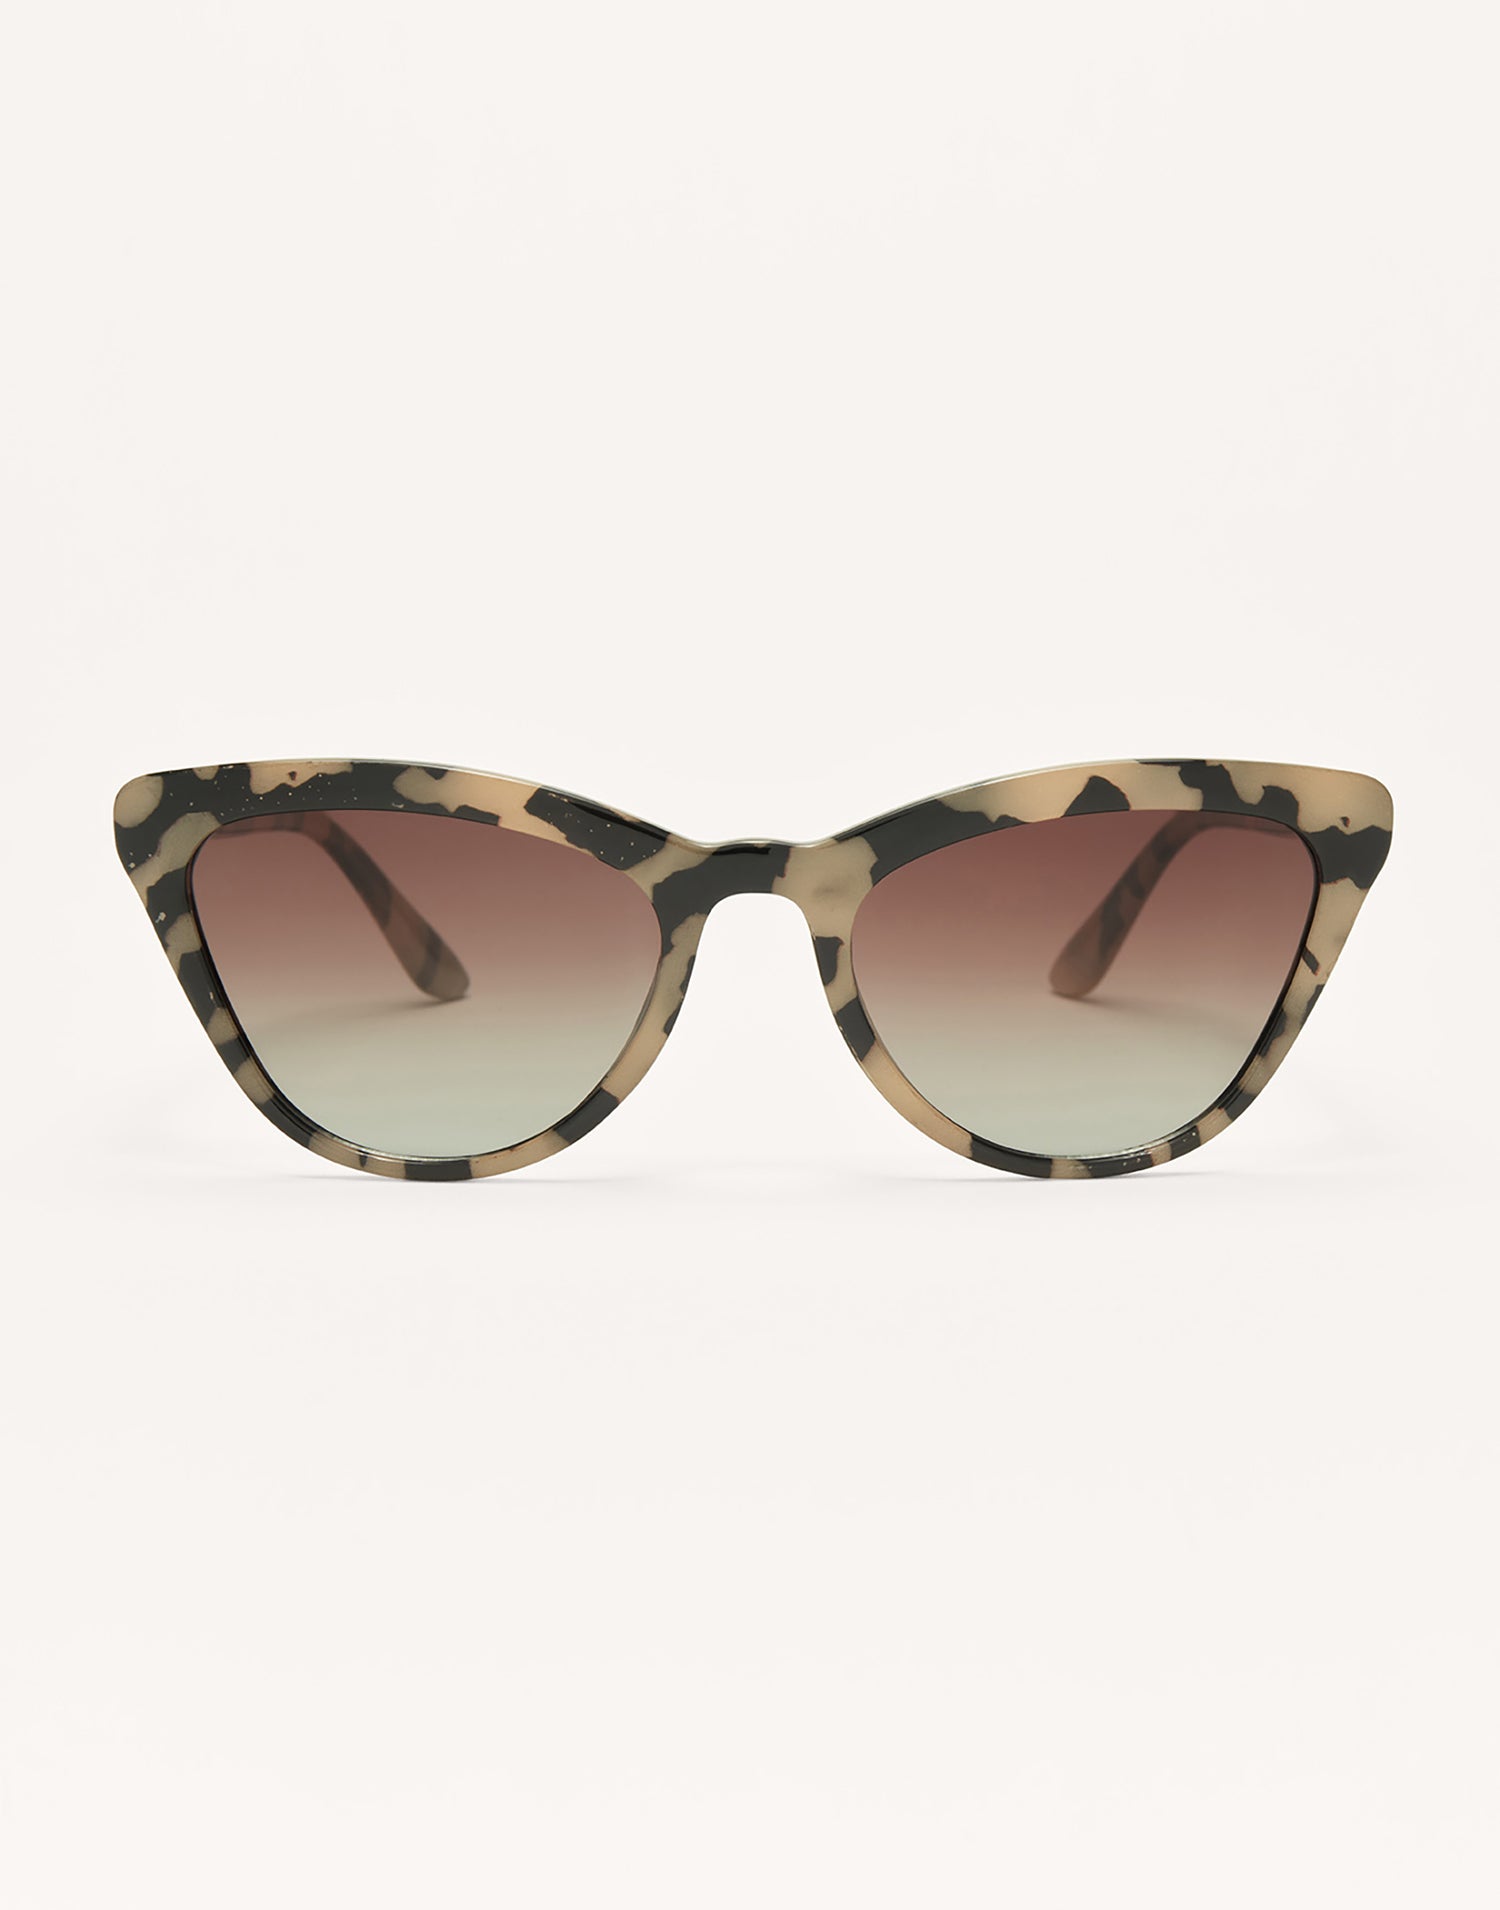 Rooftop Sunglasses by Z Supply in Brown Tortoise - Front View